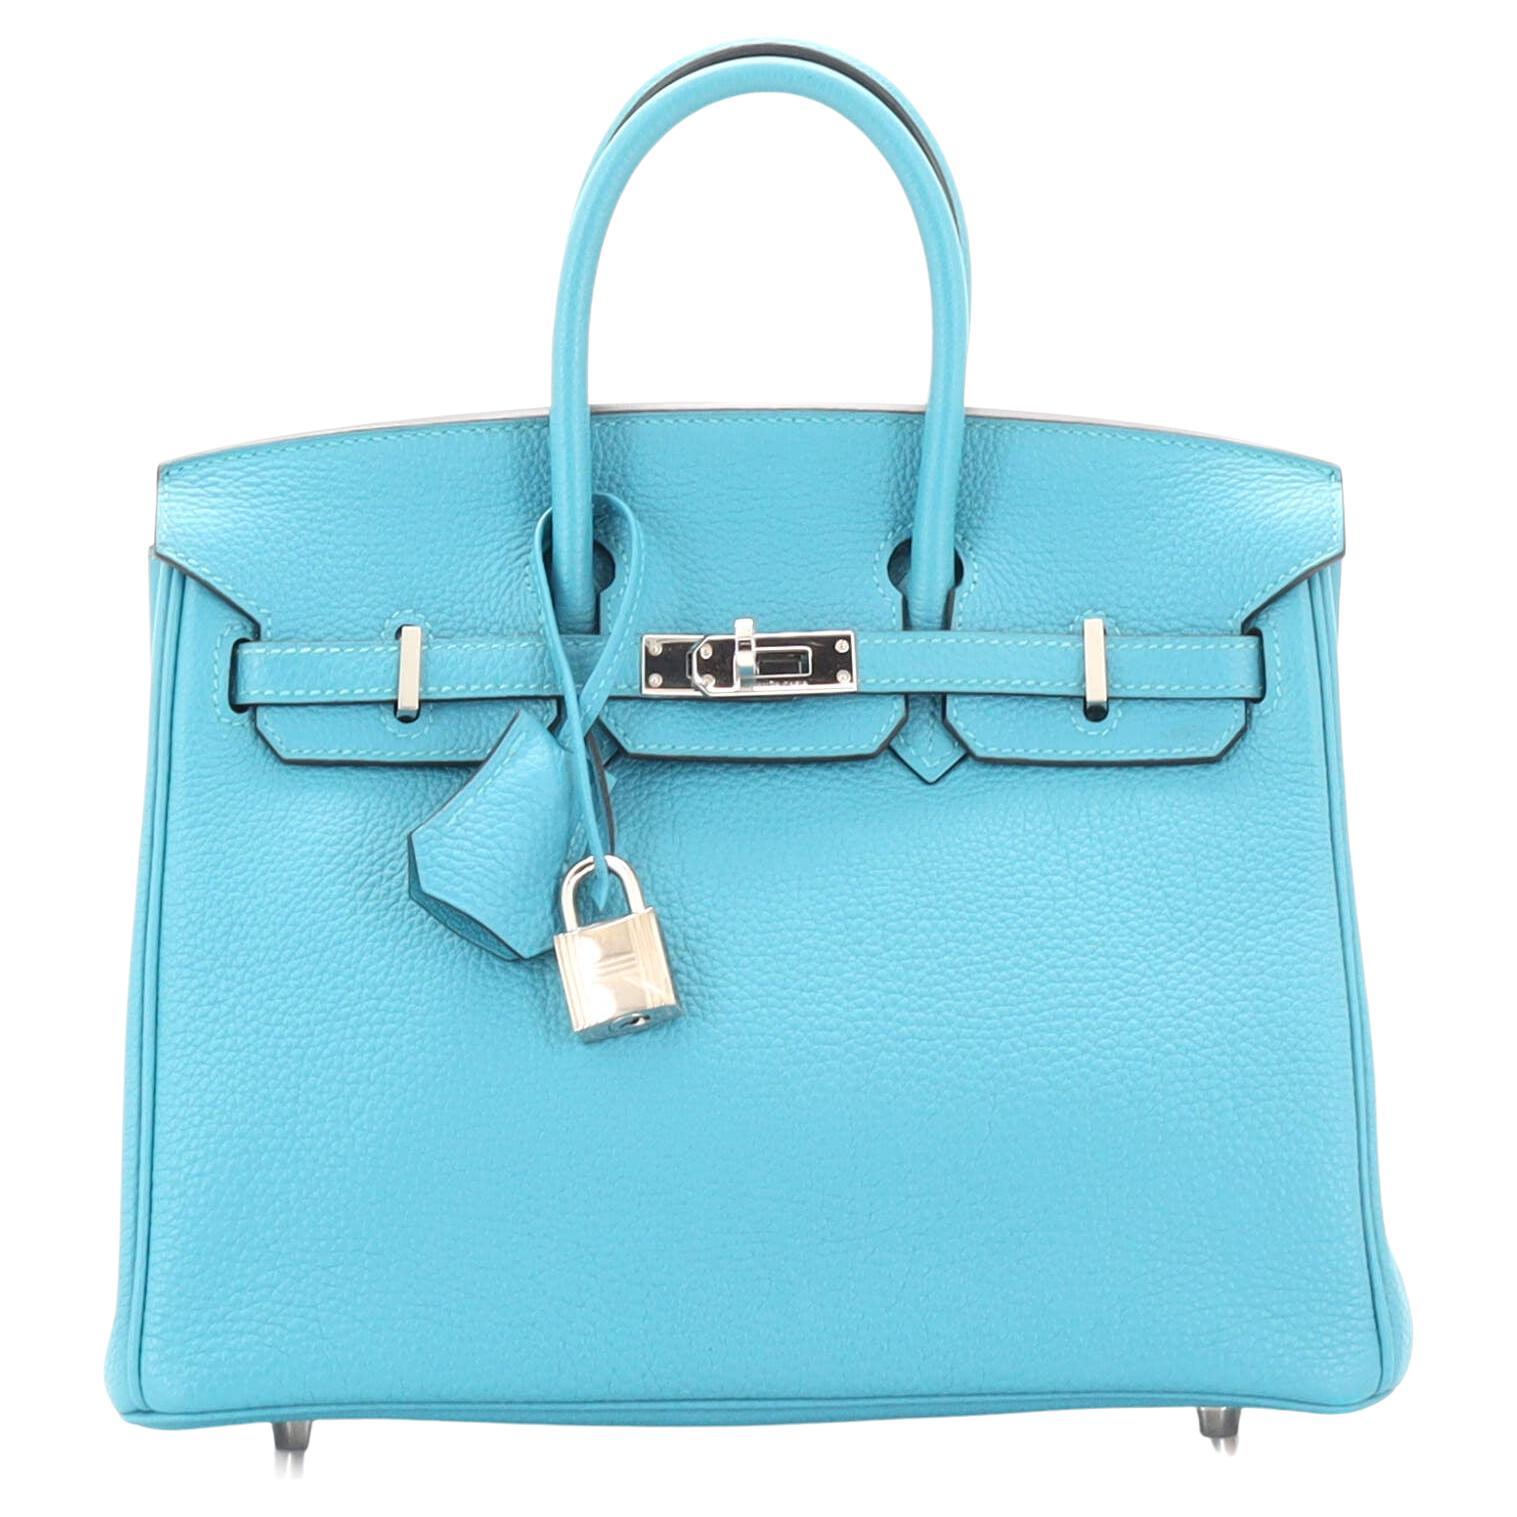 A LIMITED EDITION BLEU, NOIR, CHAI, ETOUPE & GOLD SWIFT LEATHER COLORMATIC  BIRKIN 30 WITH PALLADIUM HARDWARE